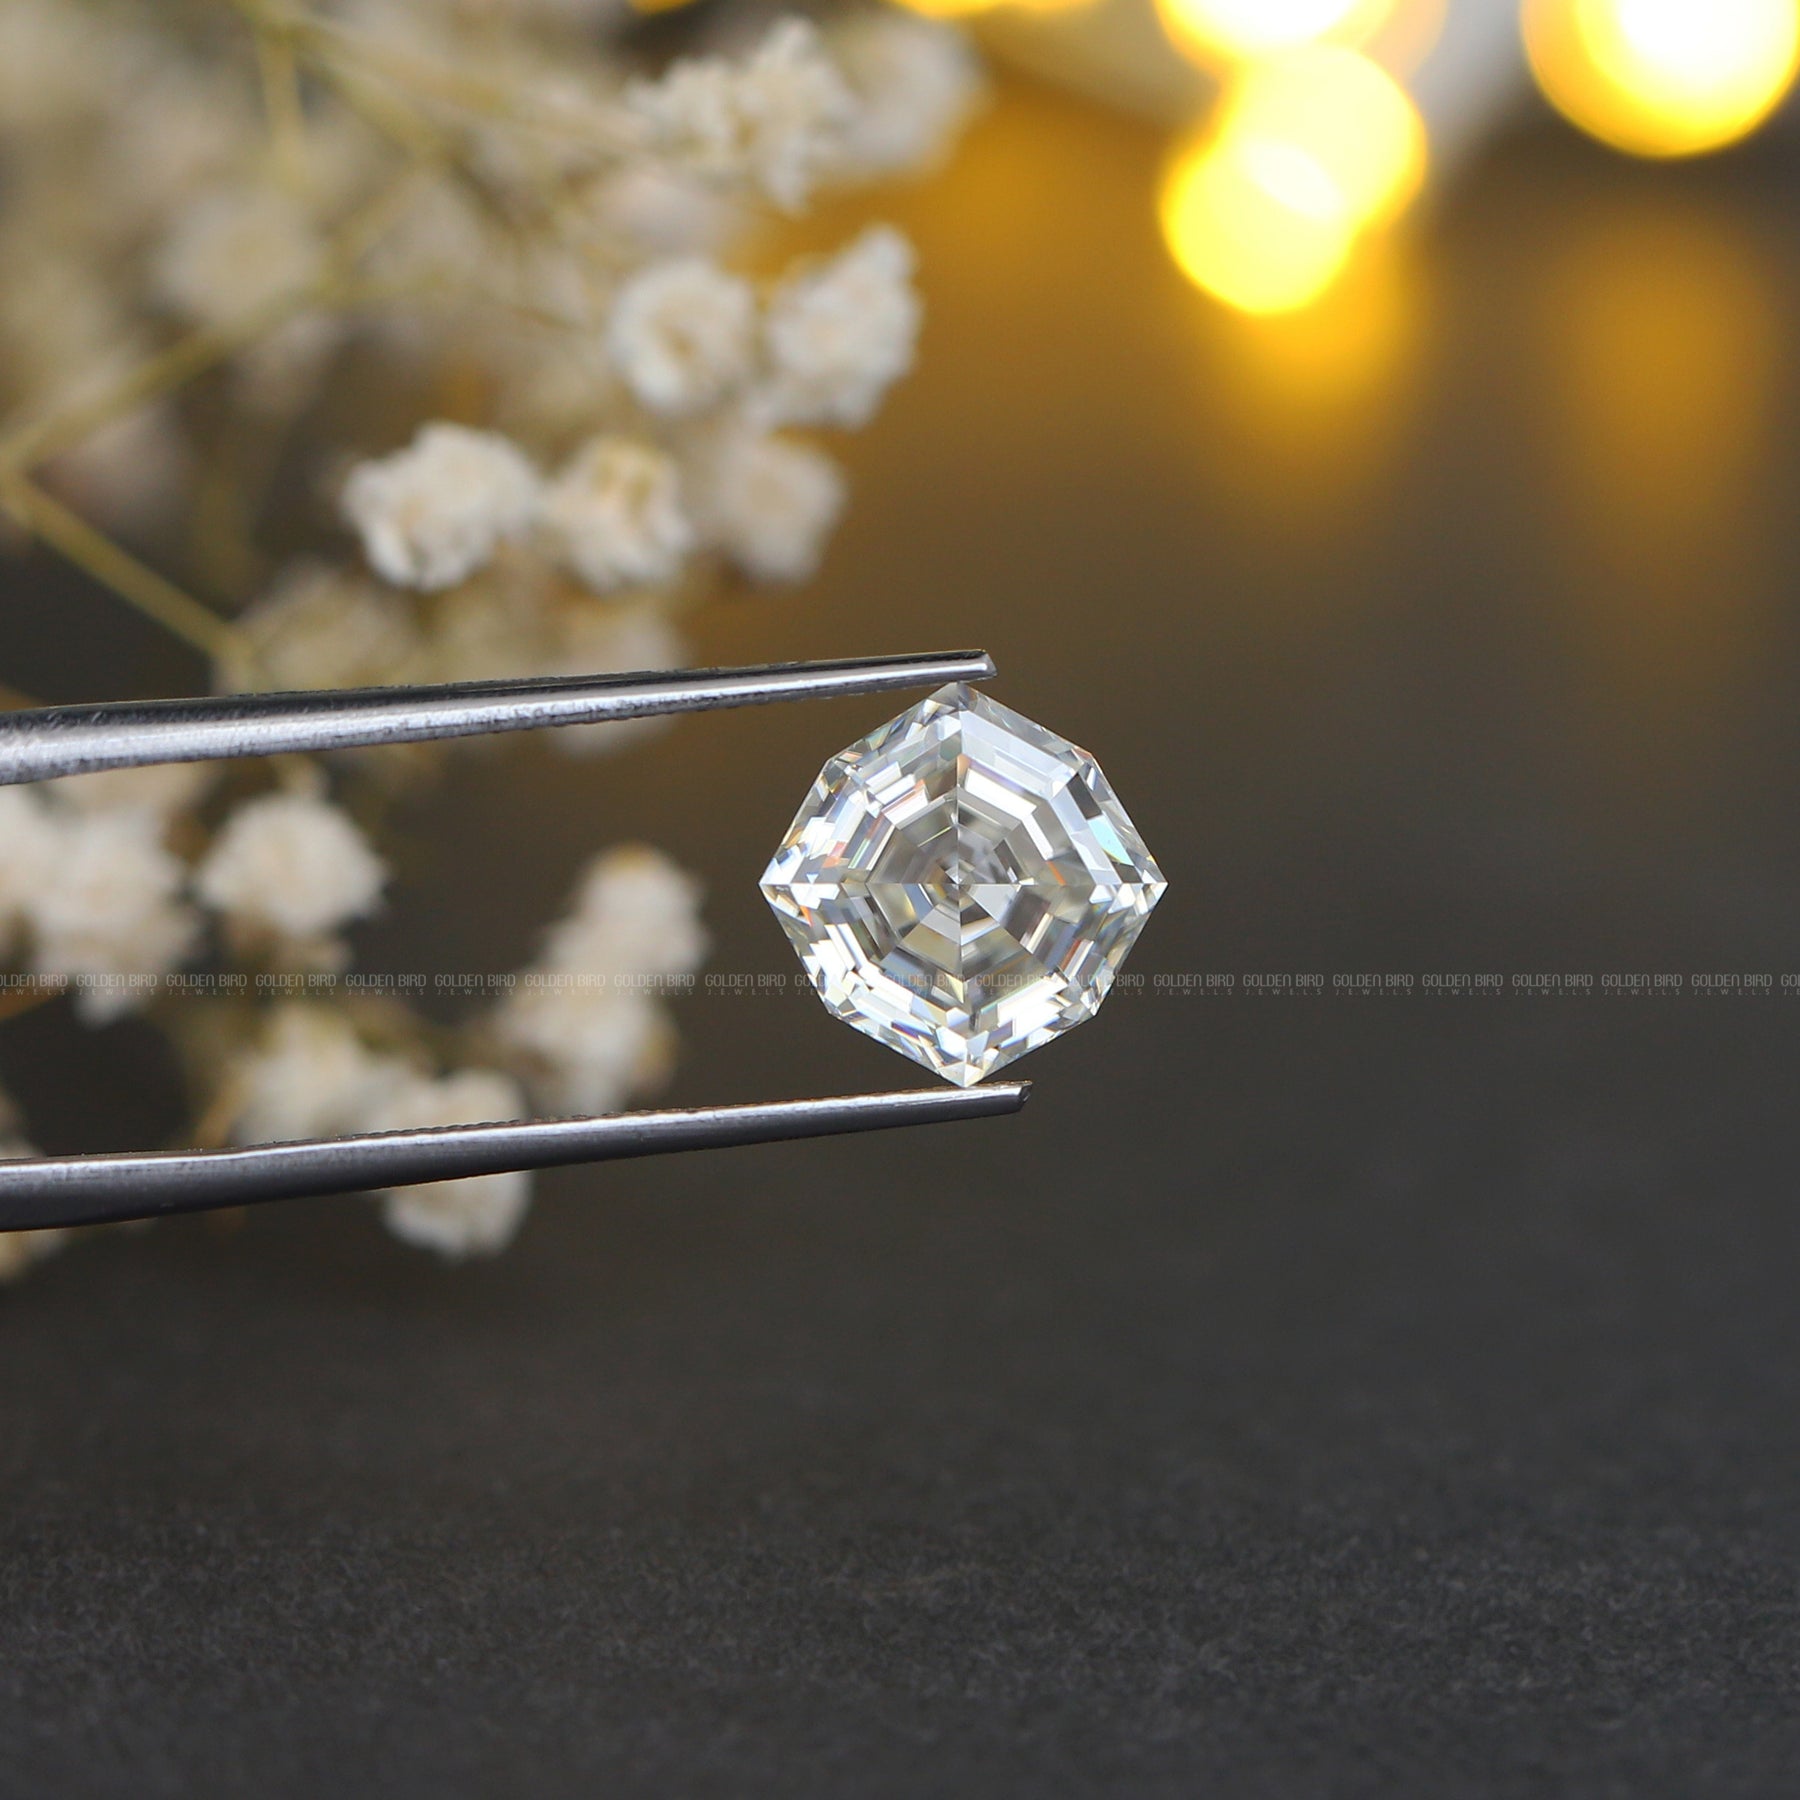 Colorless Step Cut Cushion Moissanite Loose Stone